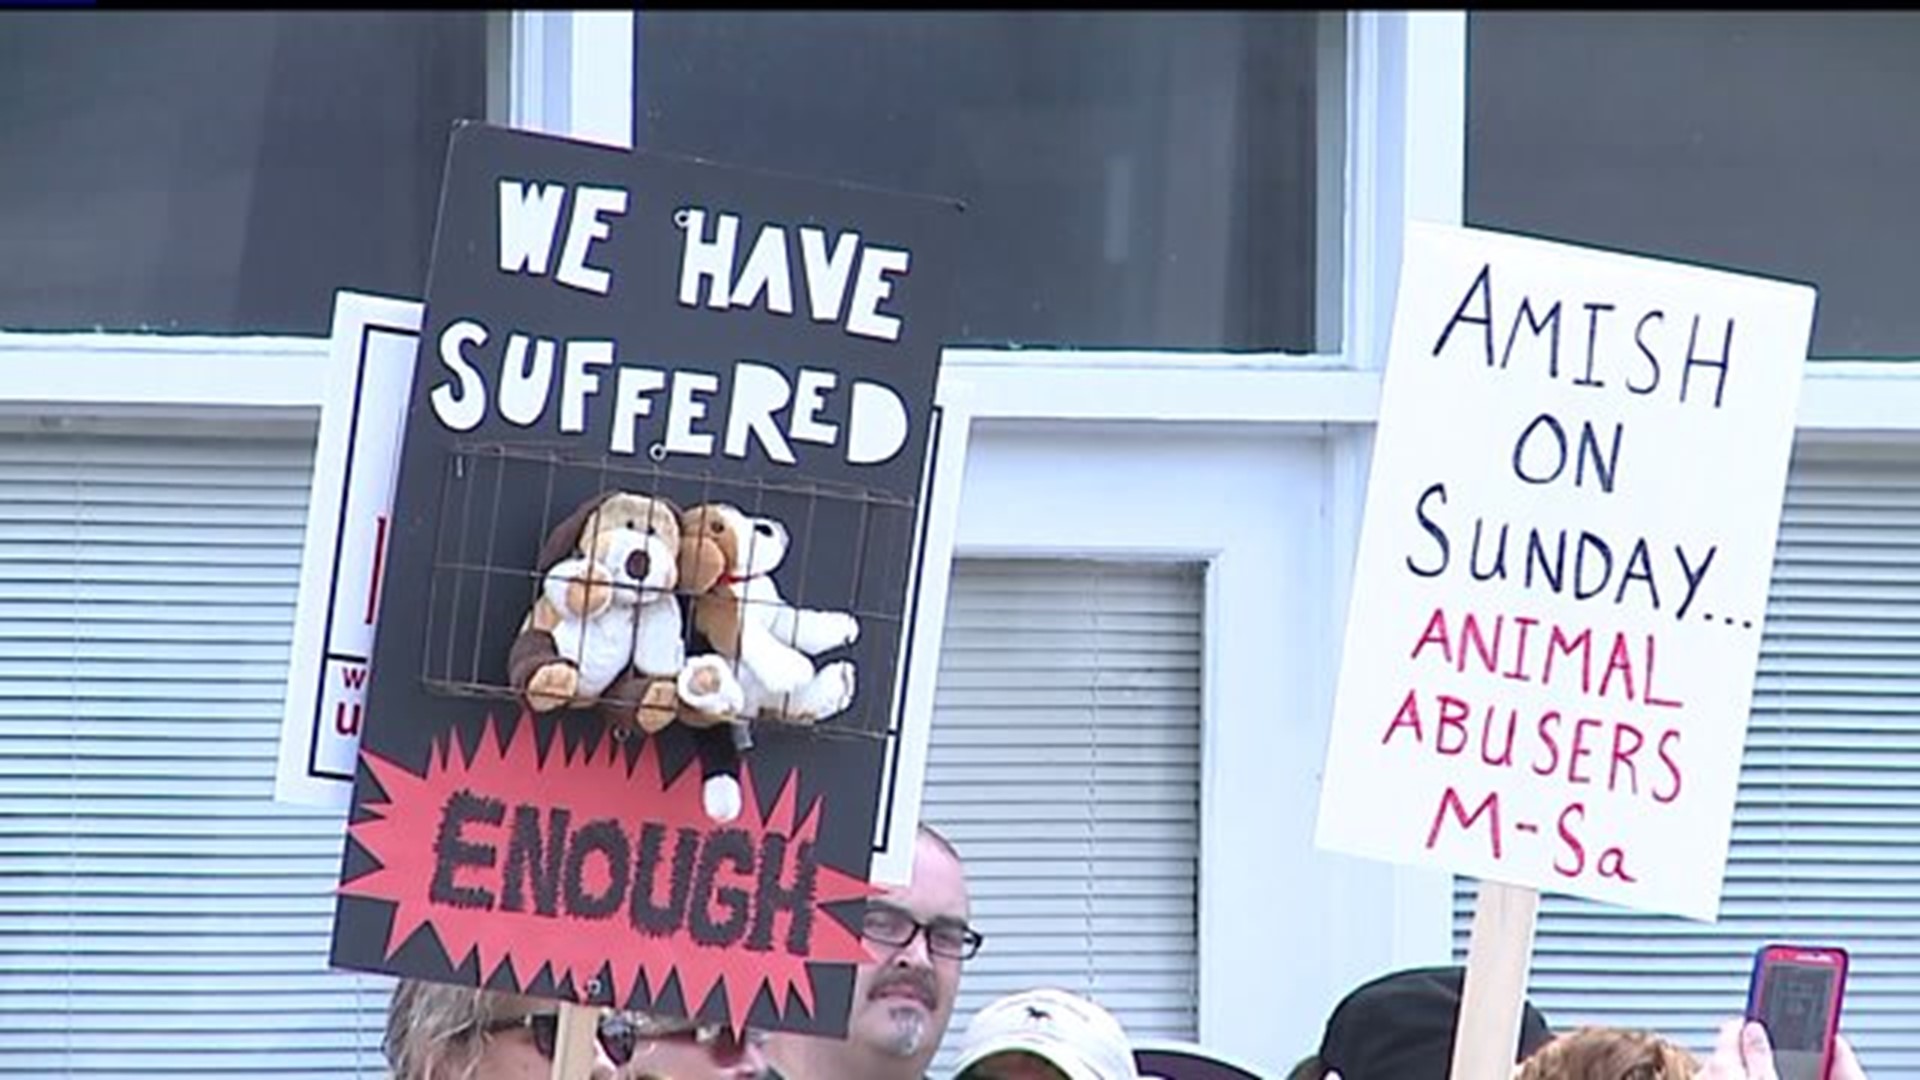 Protesters want justice for dog, demand SPCA director to step down